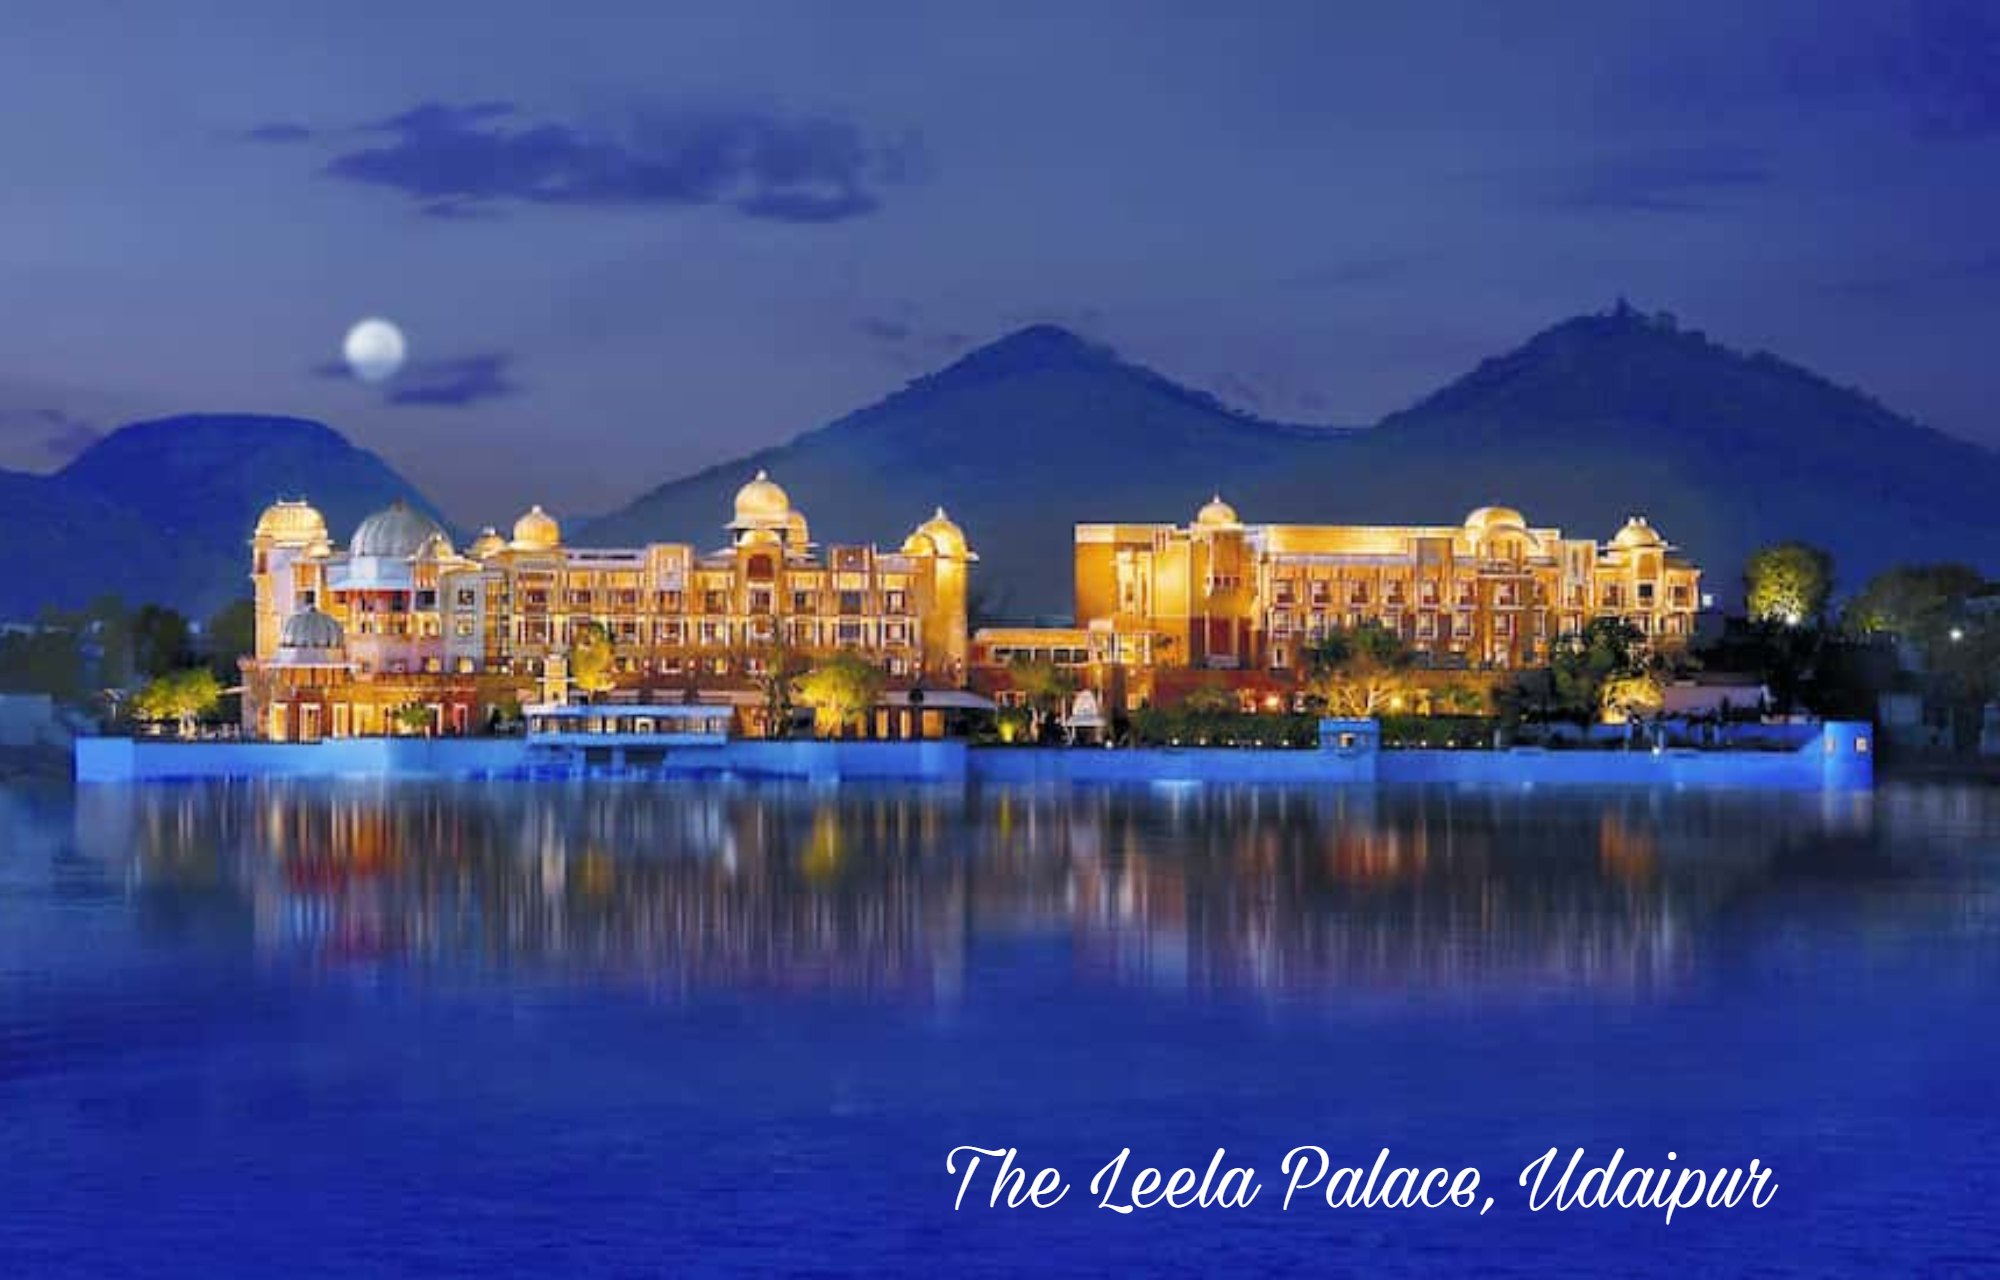 the leela palace udaipur, top 10 hotels in udaipur, udaipur best hotels, udaipur hotels